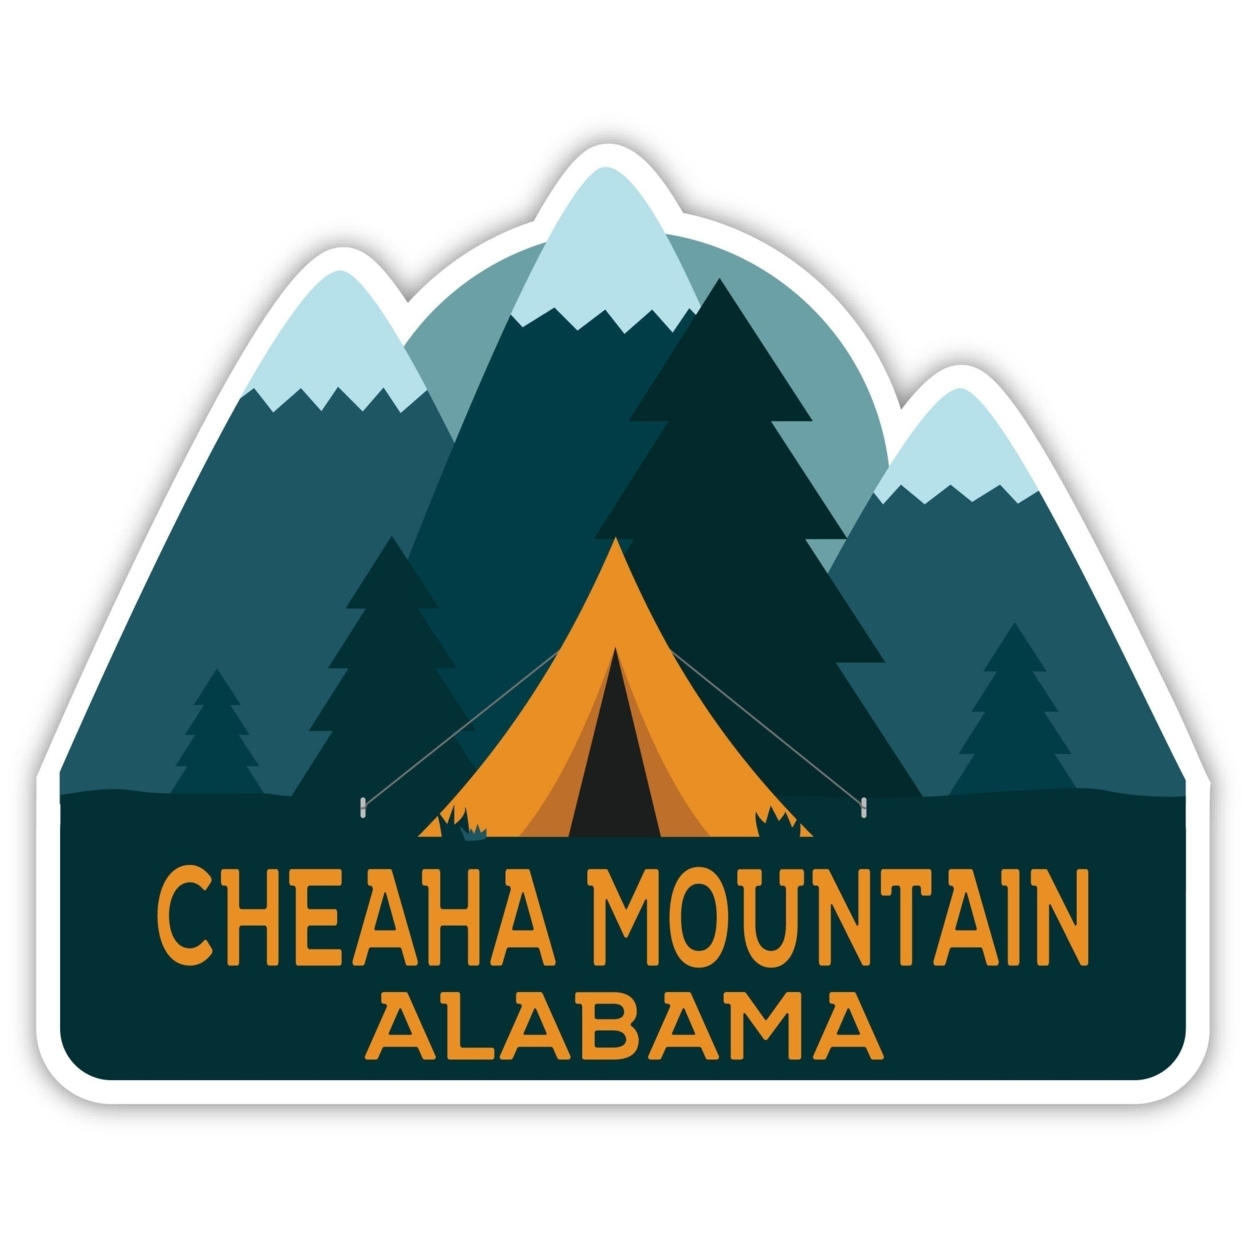 Cheaha Mountain Alabama Souvenir Decorative Stickers (Choose Theme And Size) - Single Unit, 10-Inch, Great Outdoors